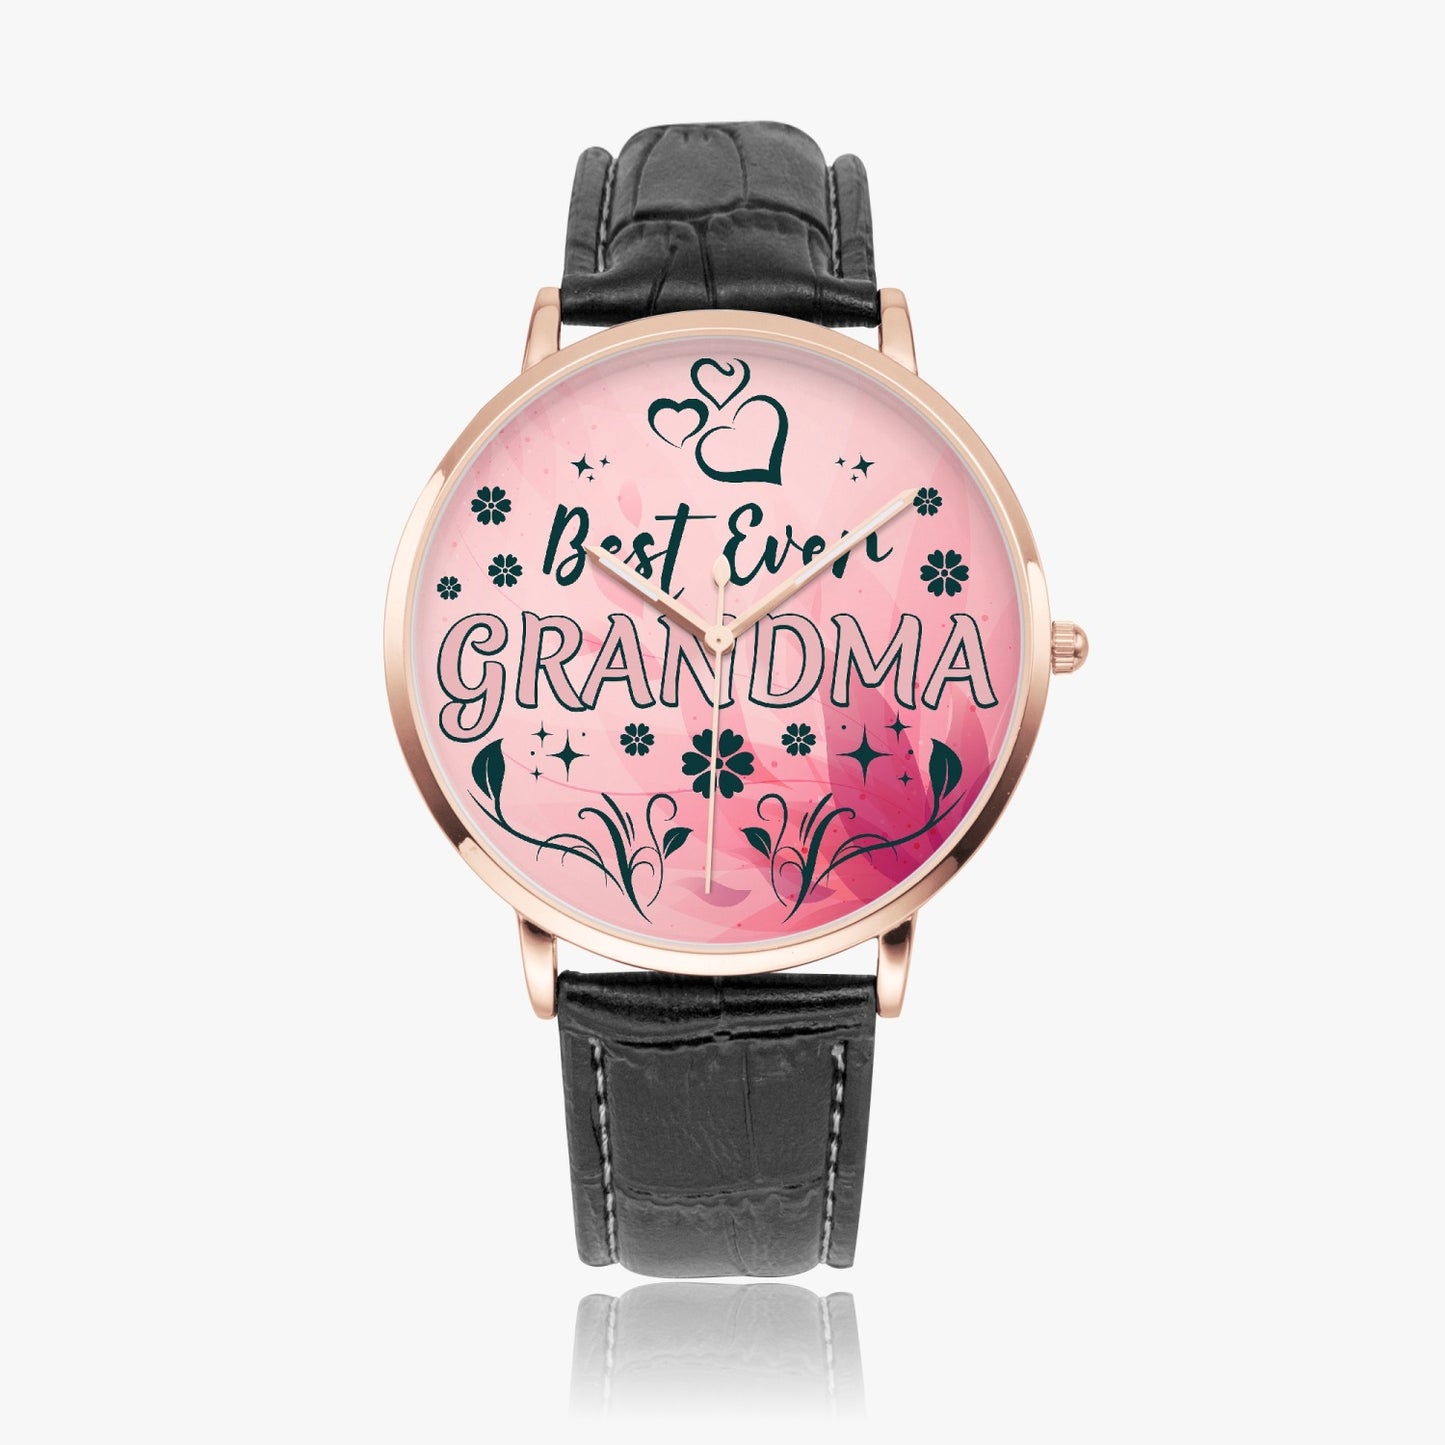 Grandma Best Ever - Quartz Watch With Leather Band